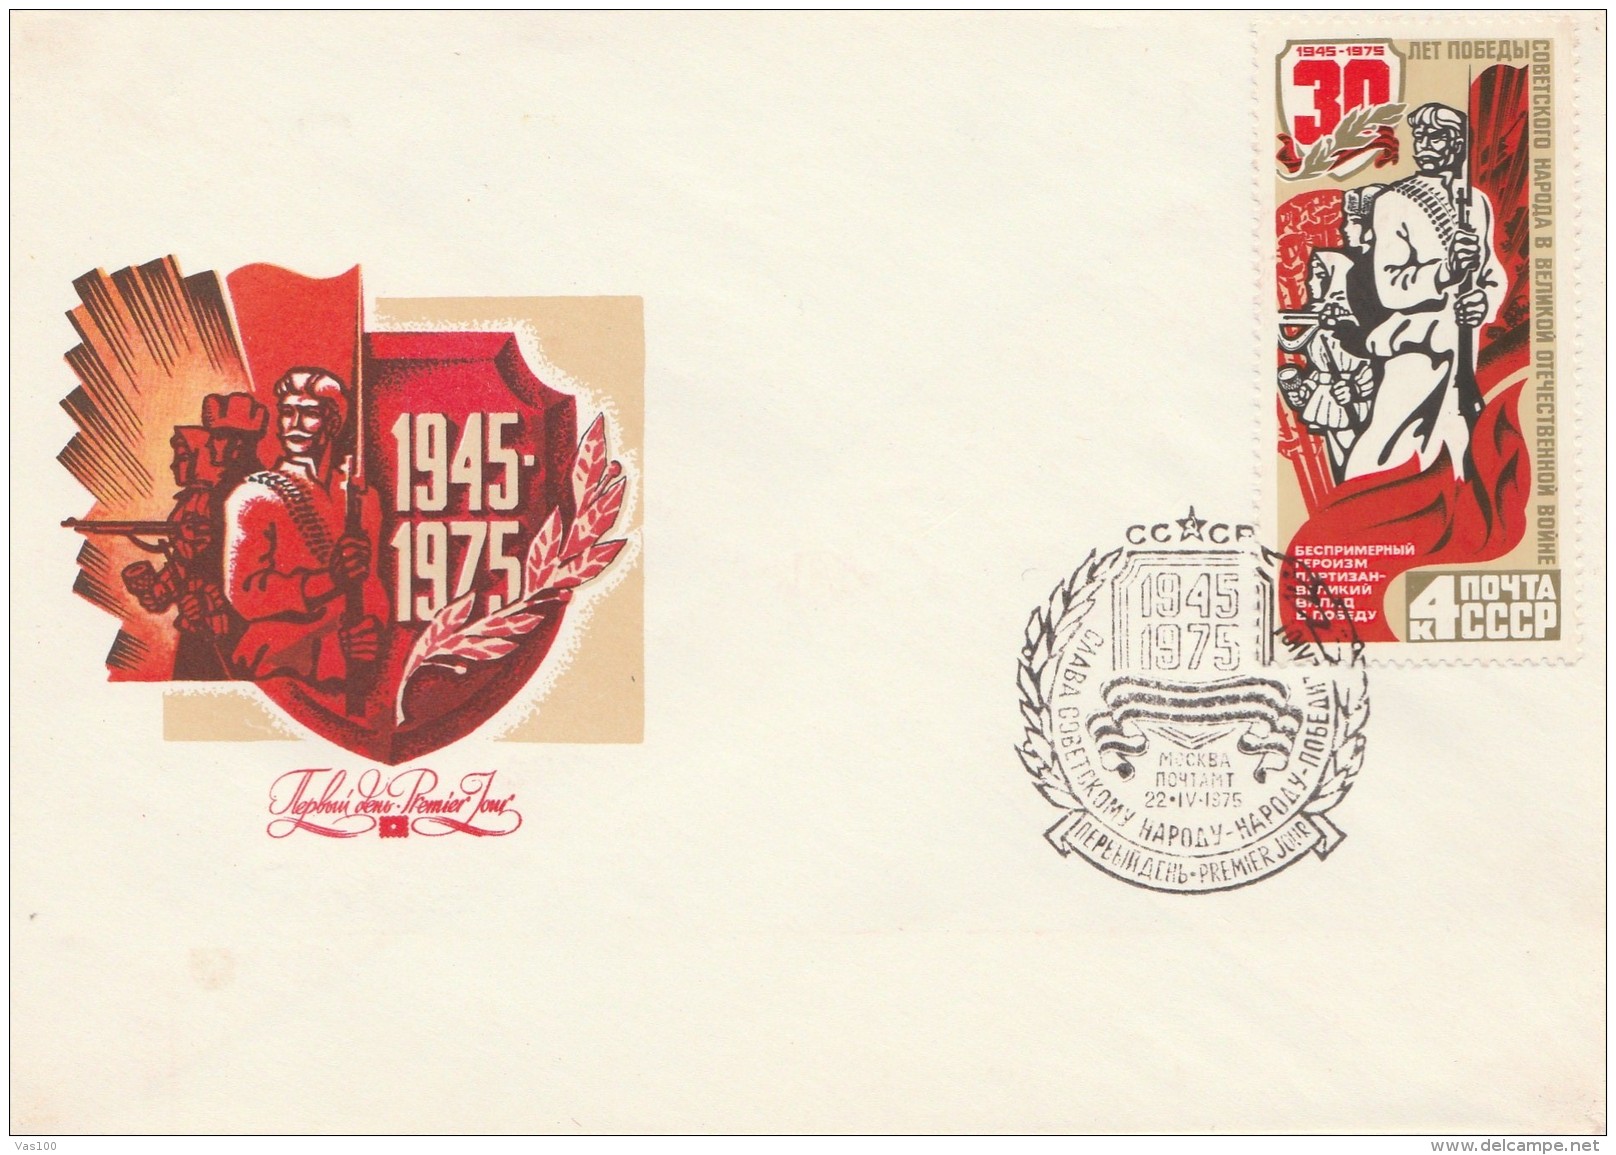 #BV5937  SOLDIER, NATIONAL, COMMUNISM, 1945-1975, COVER FDC ,1975, RUSSIA. - FDC